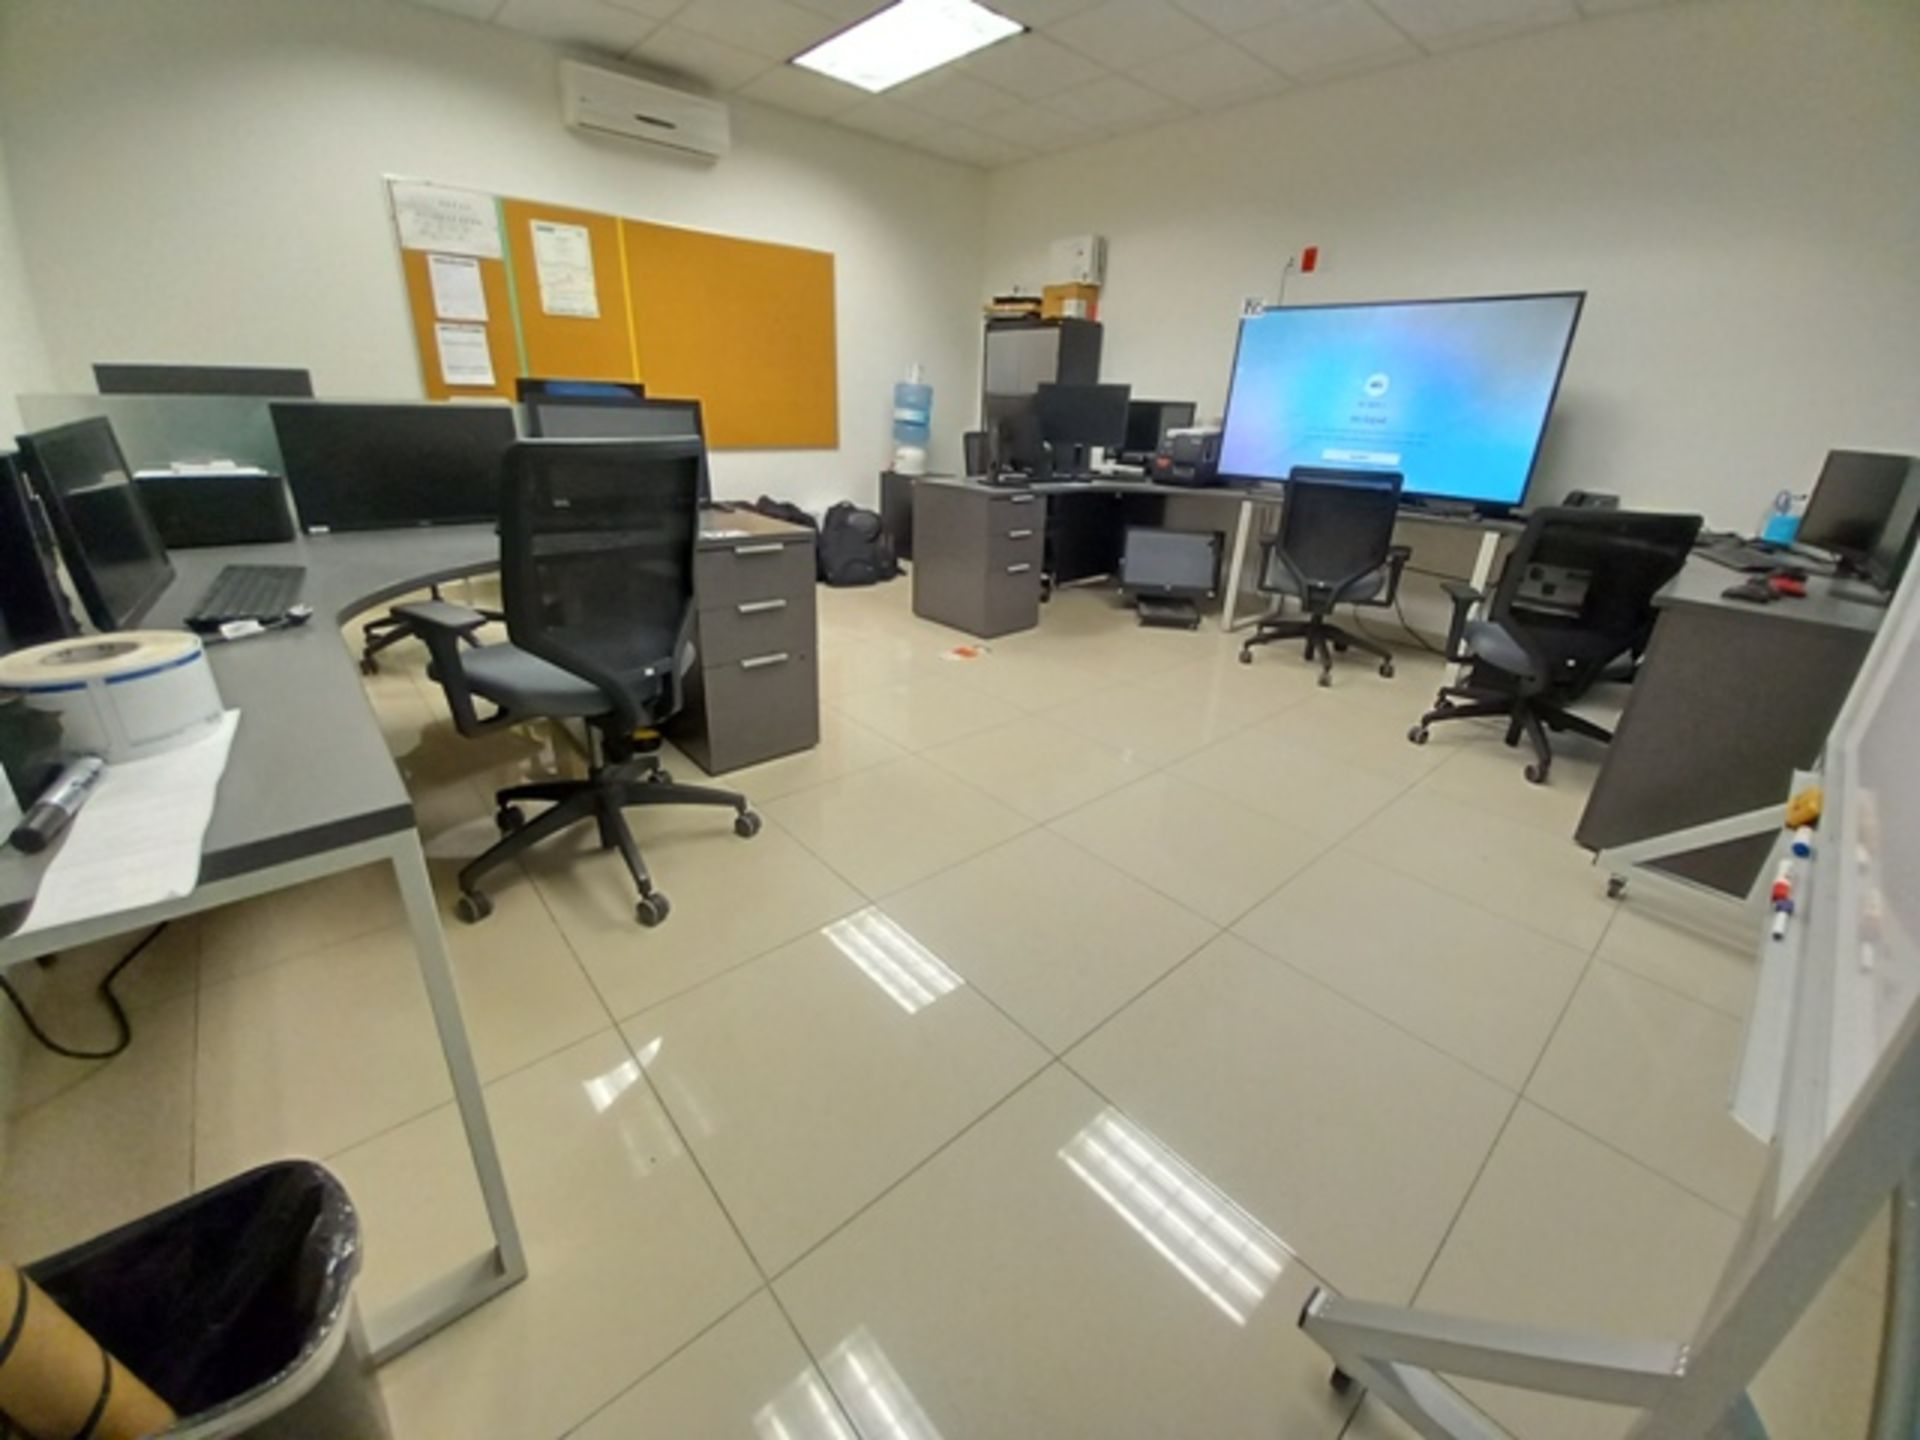 (29) Pcs Office Furniture and Computer Equipment Consisting of: (2) 2 Person Work Stations and more